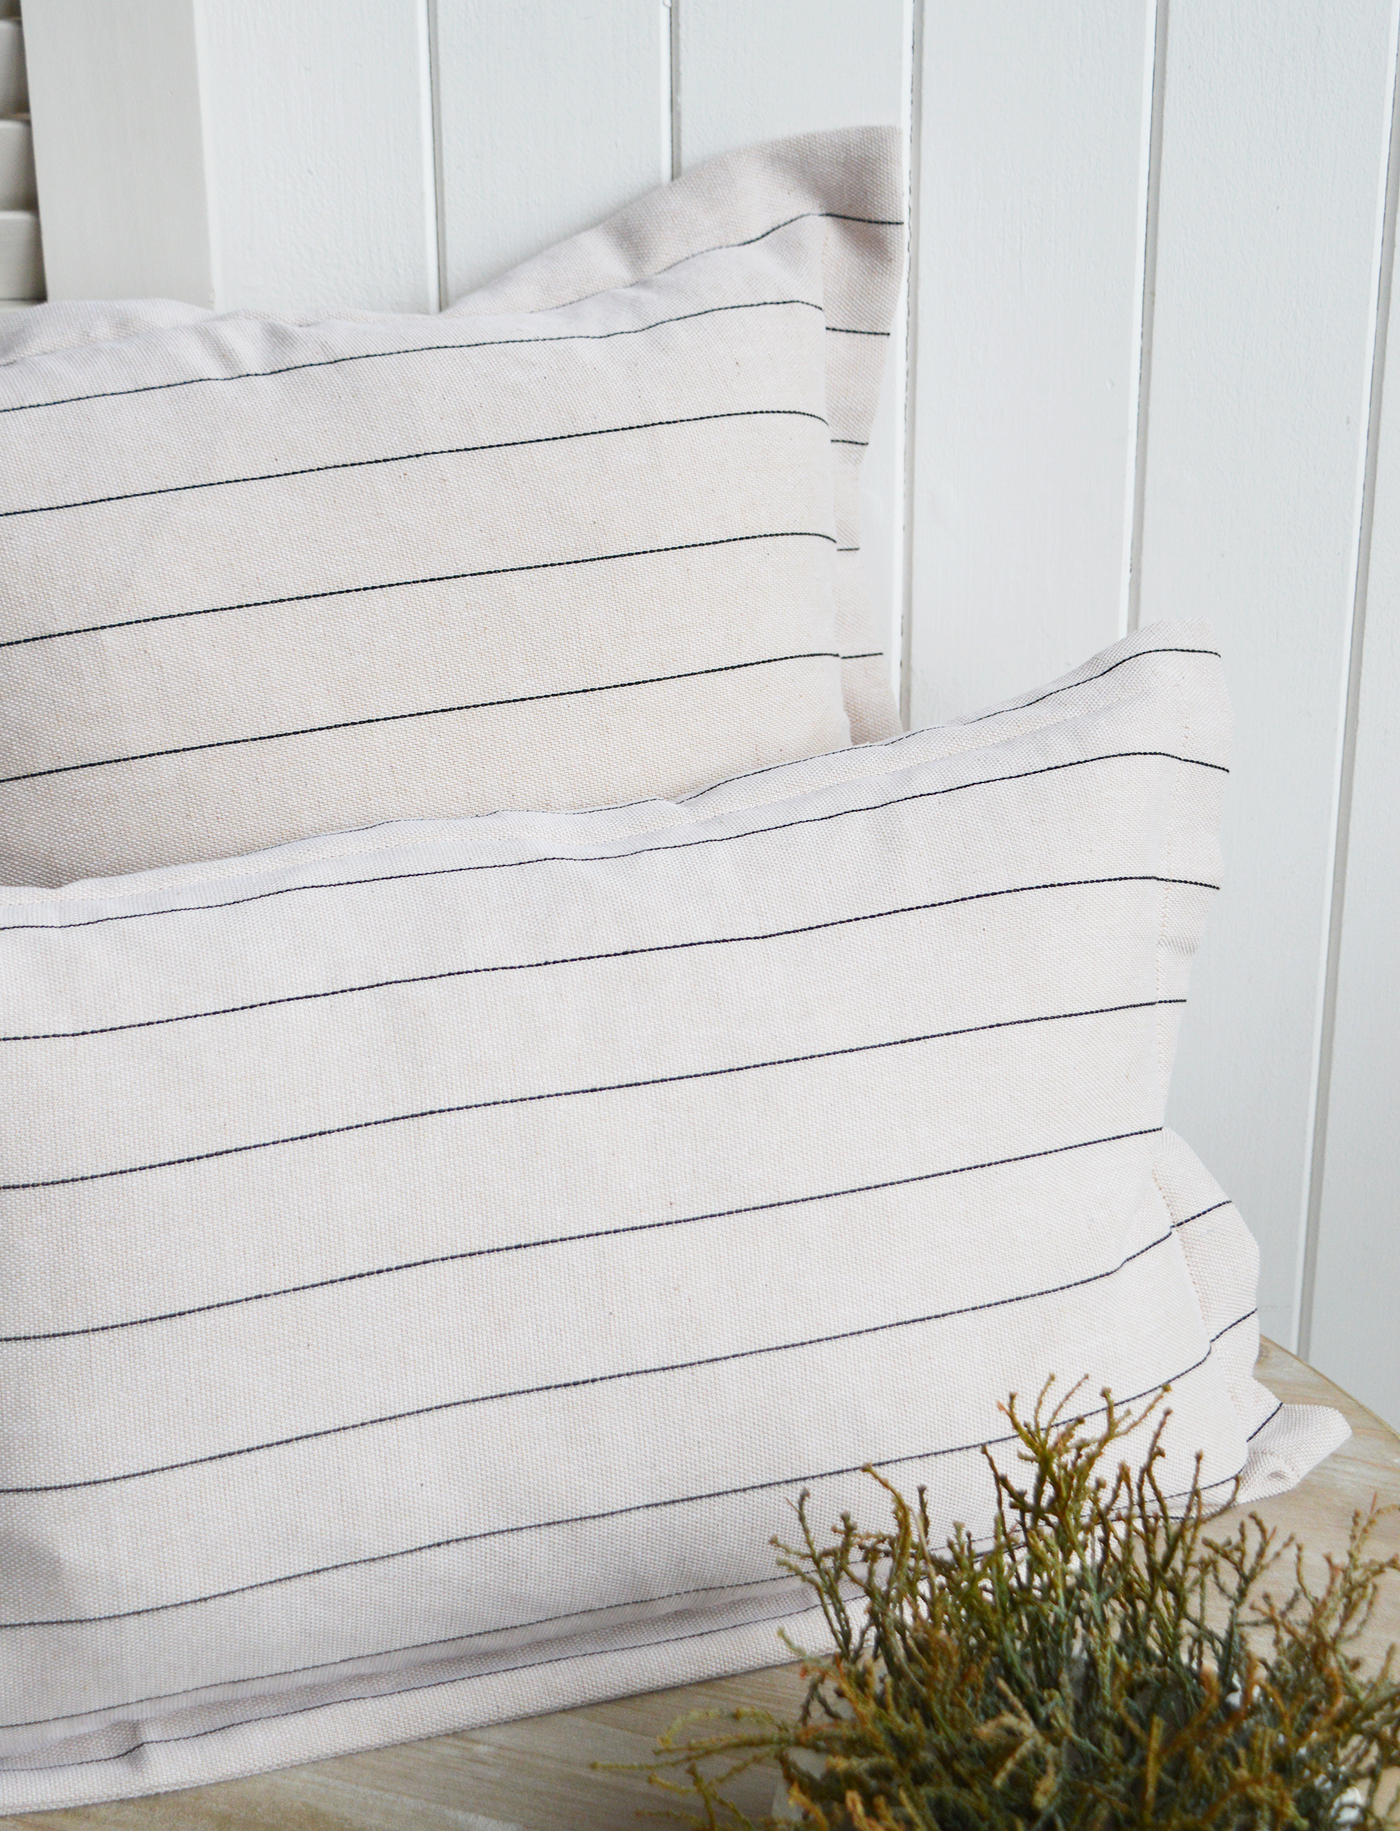 New England Style Country, Coastal and White Furniture and accessories for the home. Hamptons and New England coastal cushions and soft furnishings - Peabody Stripe Cushion Cover